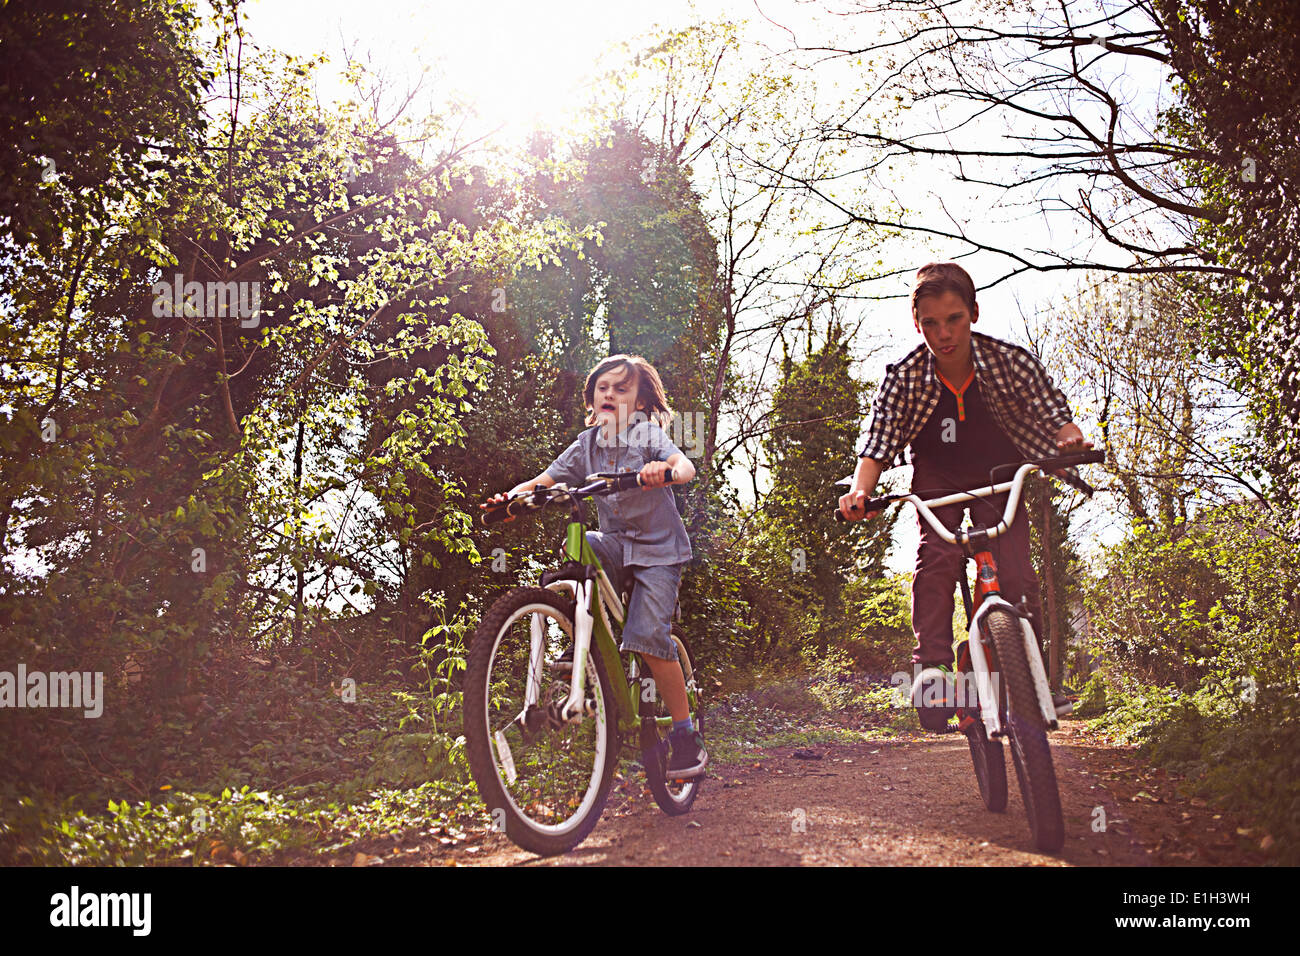 Boys cycling through forest Stock Photo